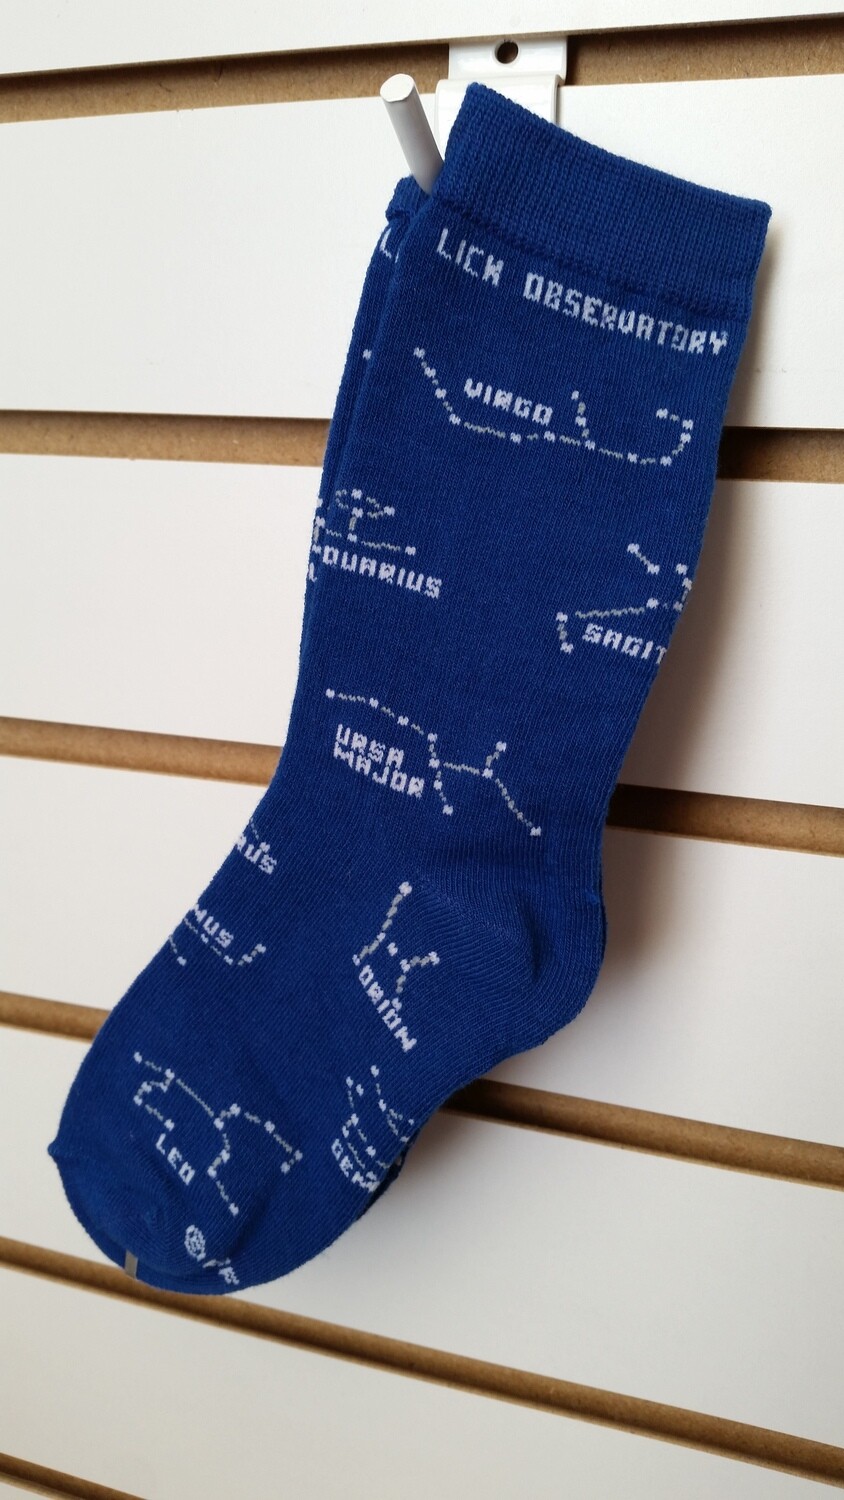 Lick Observatory Kids' Constellations Sock, Blueberry